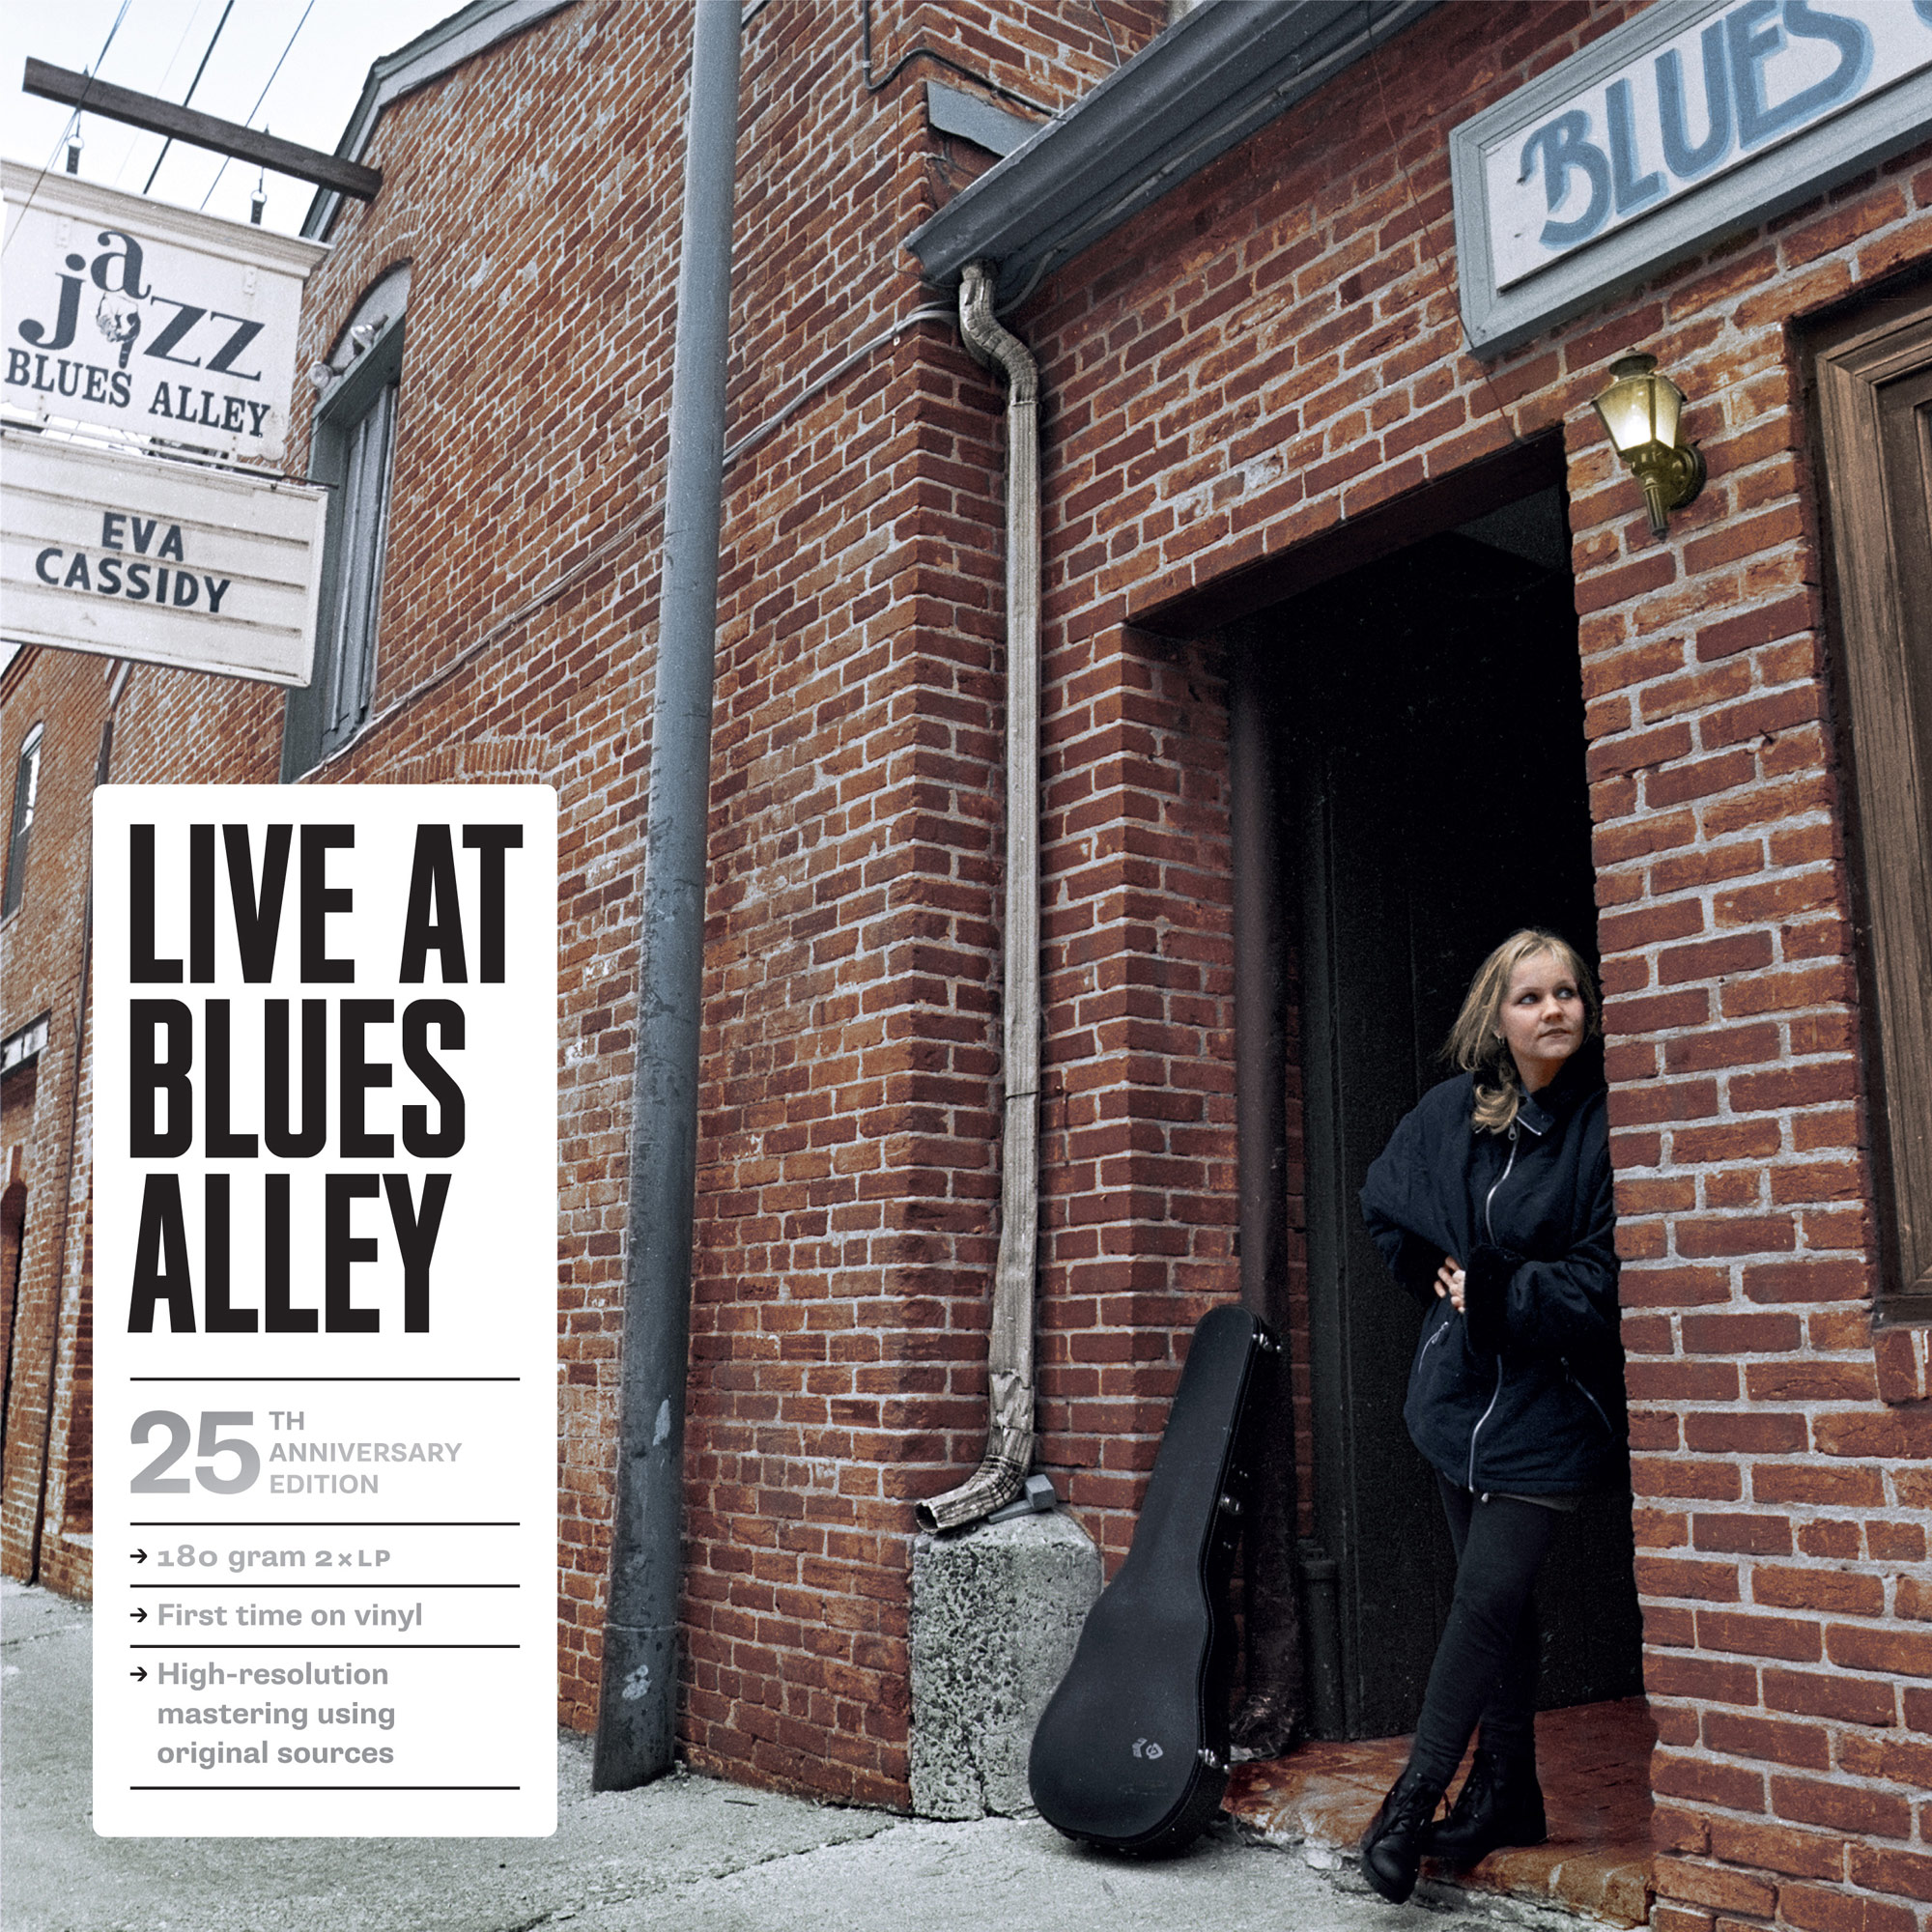 Blix Street Records: Eva Cassidy’s “Live at Blues Alley” 25th Anniversary Edition